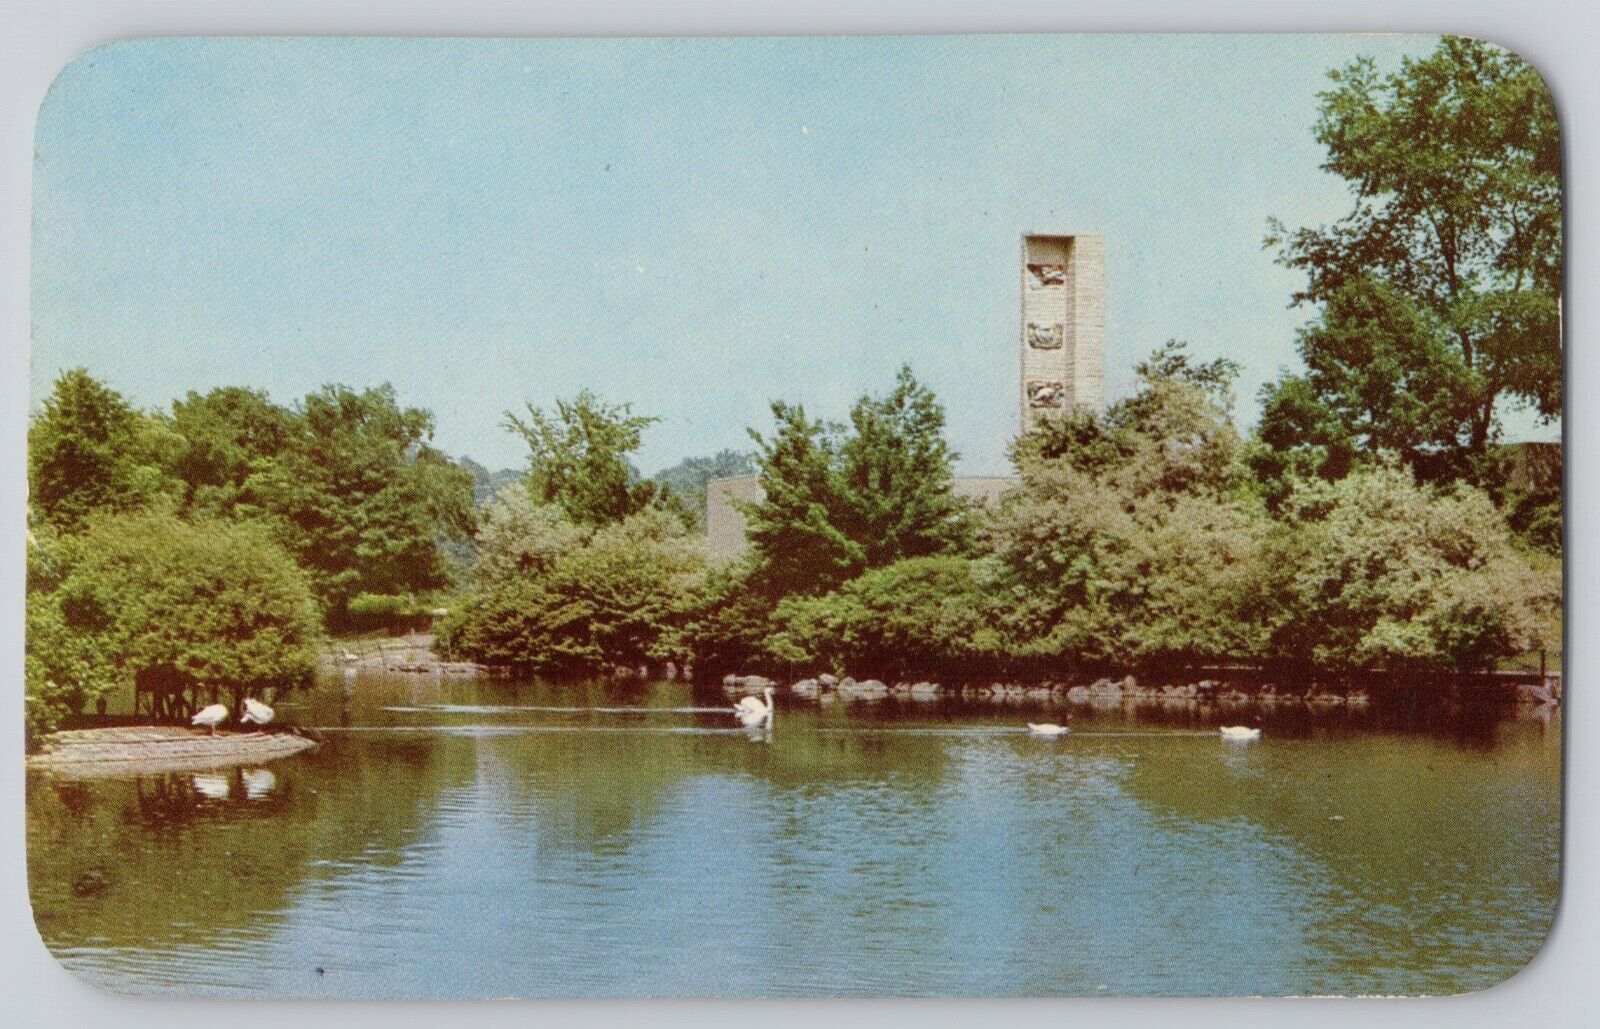 Water Fowl Sanctuary with New Bird House Cleveland Zoo Cleveland Ohio Postcard